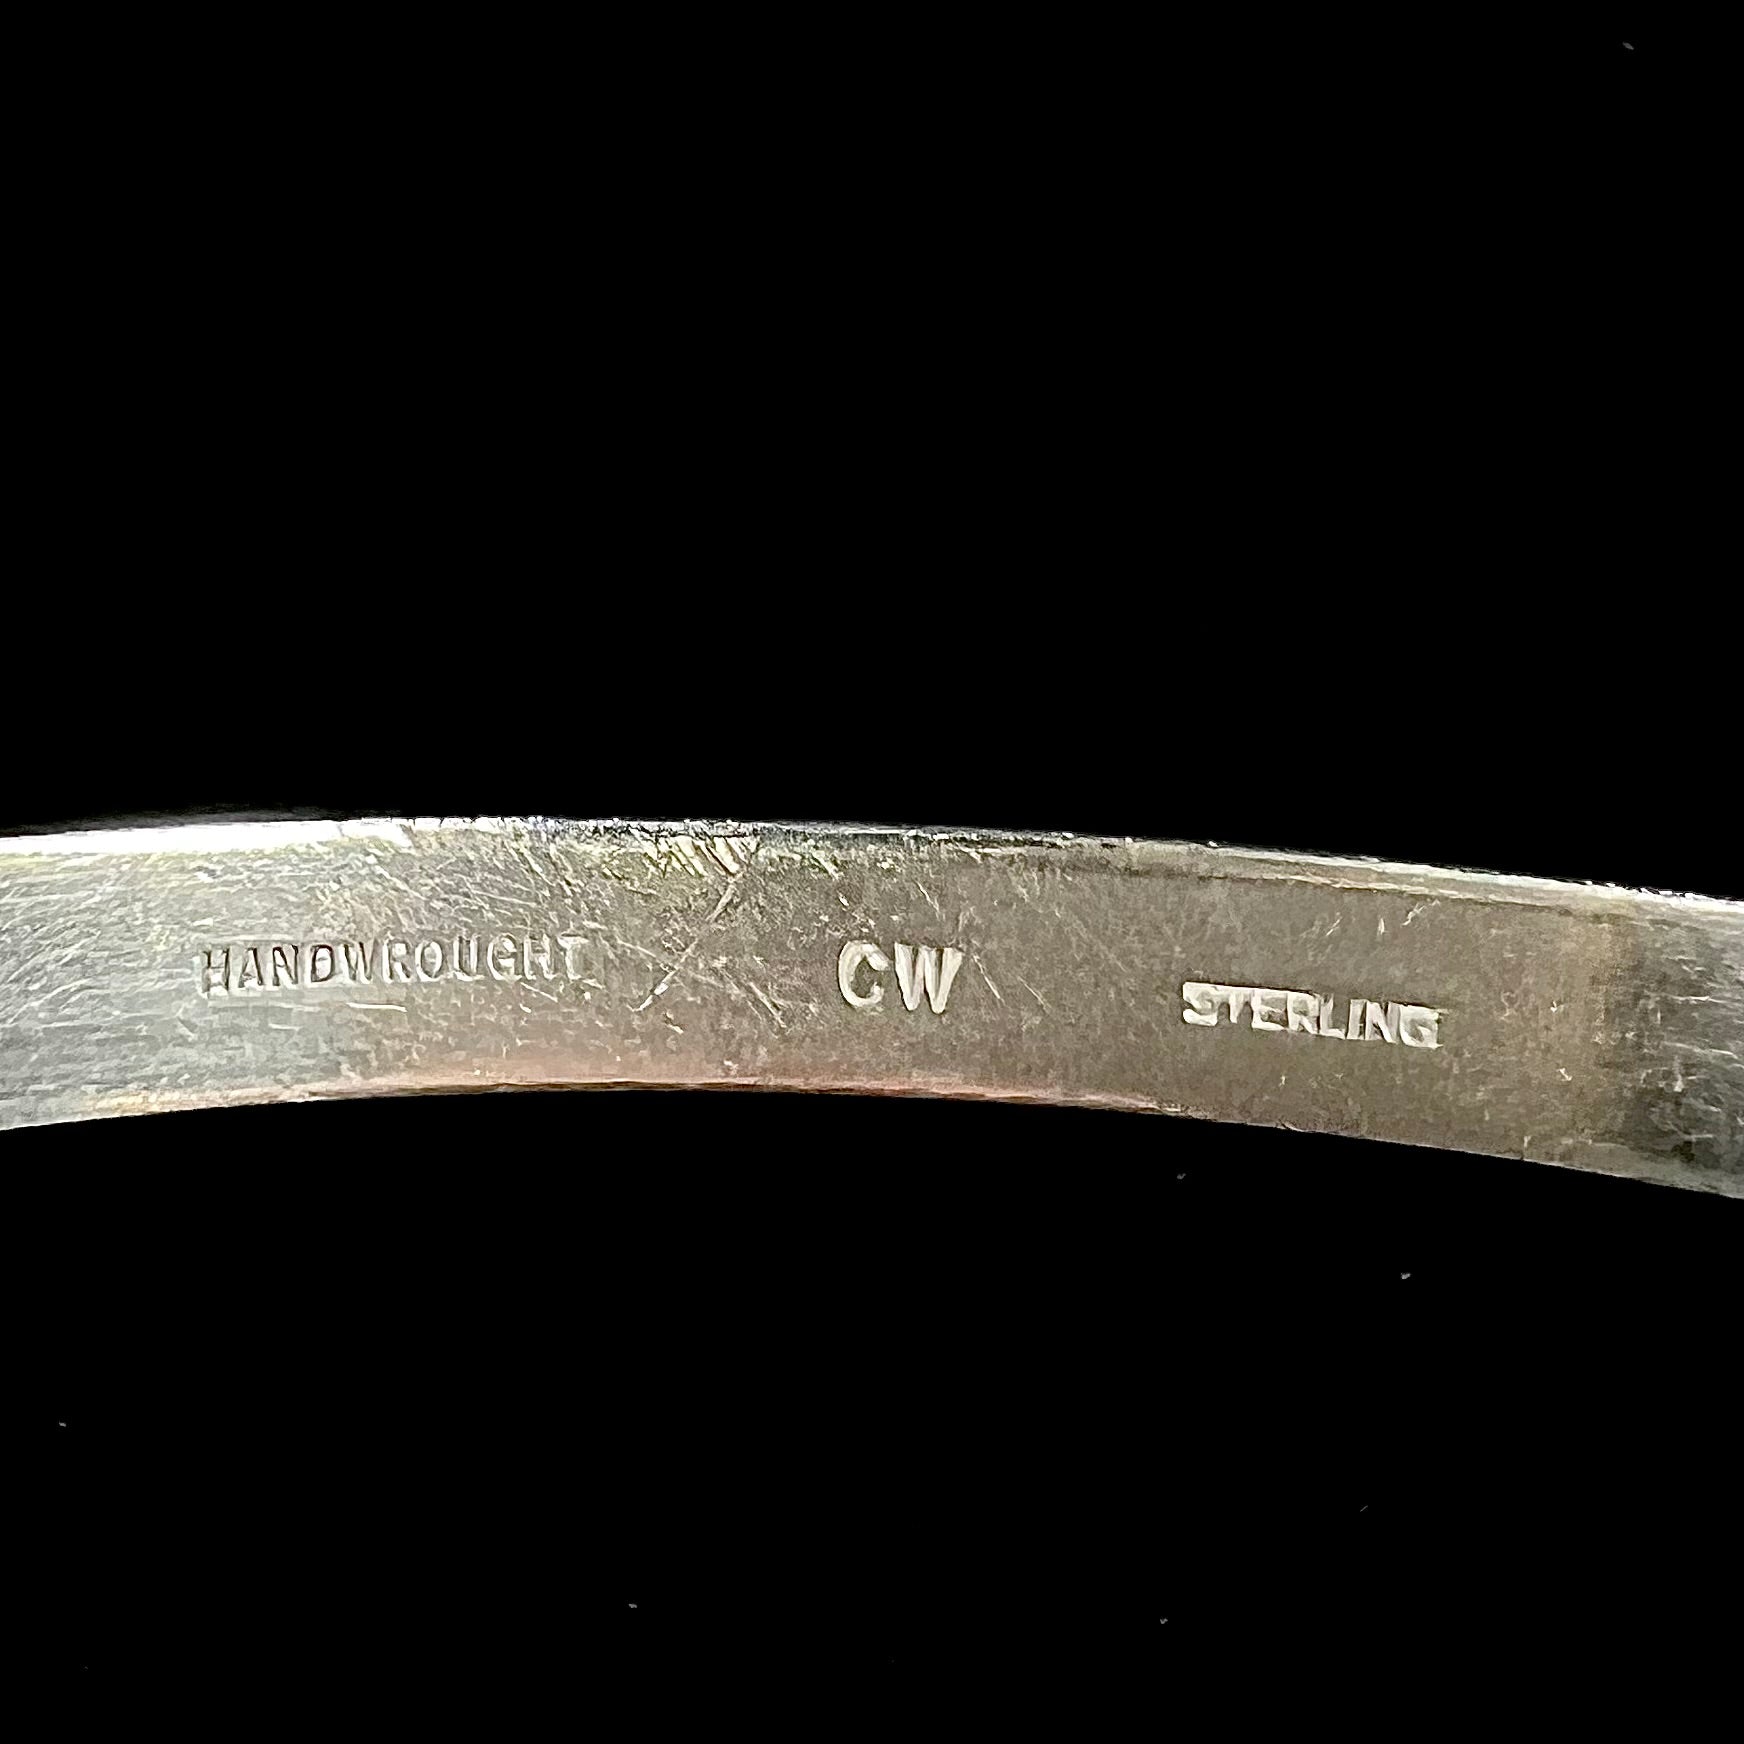 A ladies' sterling silver bangle bracelet stamped "CW" by the Hopi Indian artist, Cheryl Wadsworth.